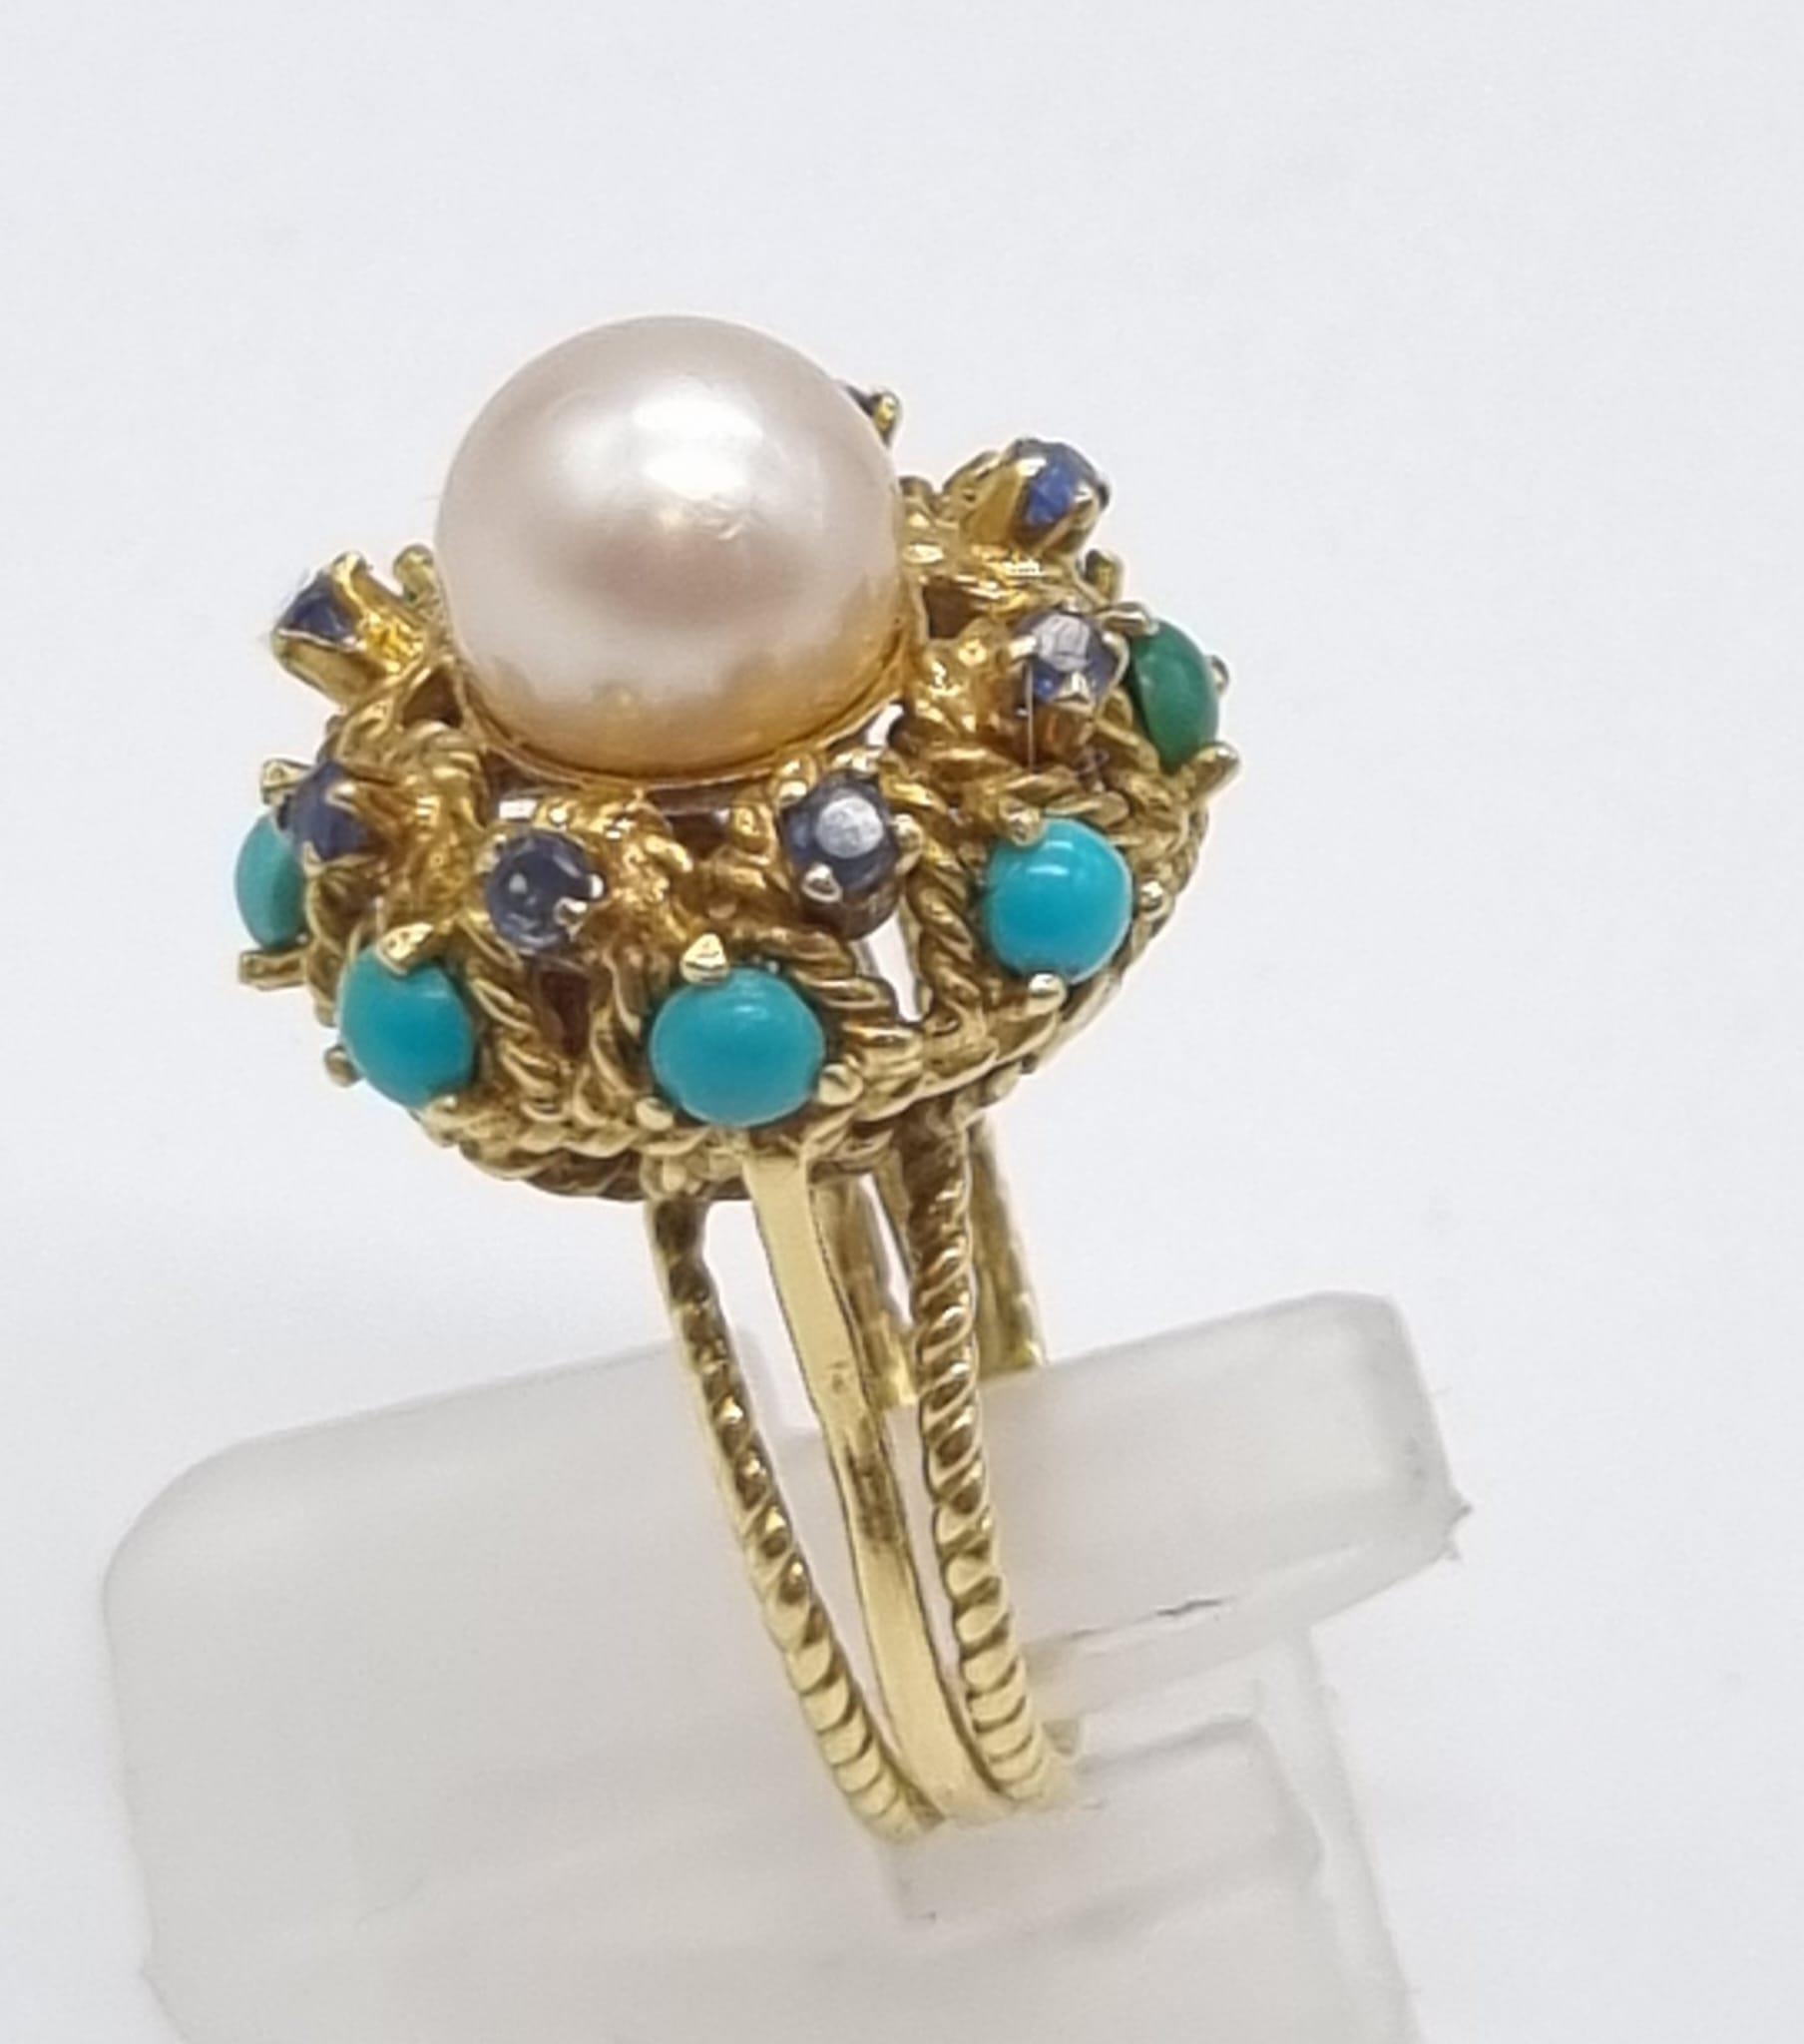 A Wonderful Vintage Possibly Antique 18K Yellow Gold, Turquoise and Pearl Ring/Brooch Set. Ring - - Image 4 of 13